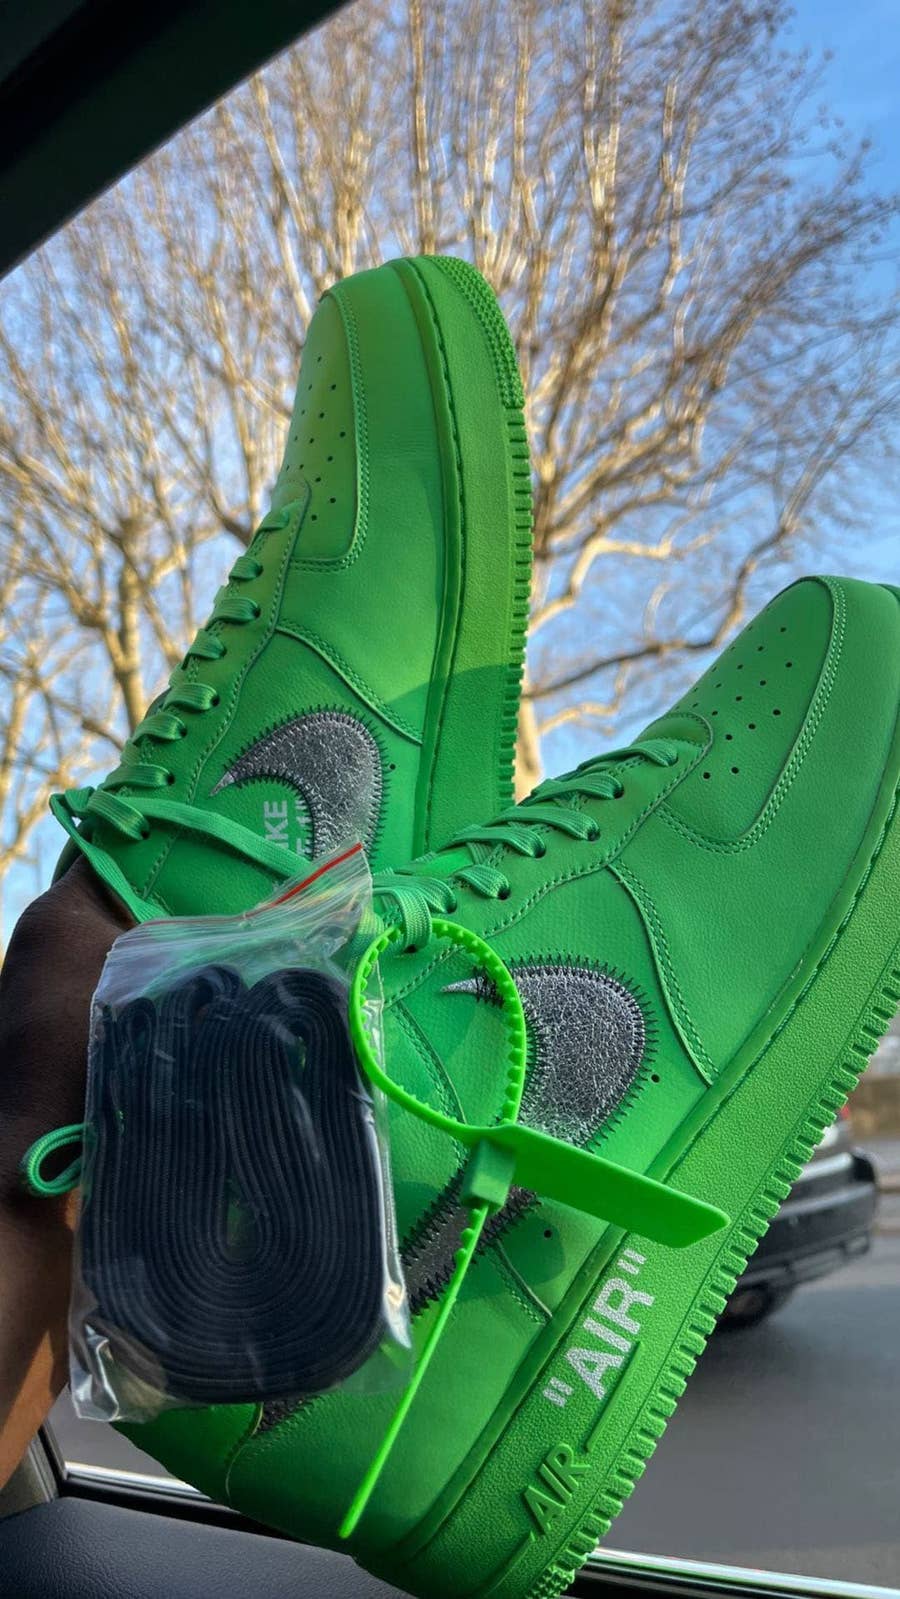 Nike Air Force 1 Hi sneakers in off-white and green